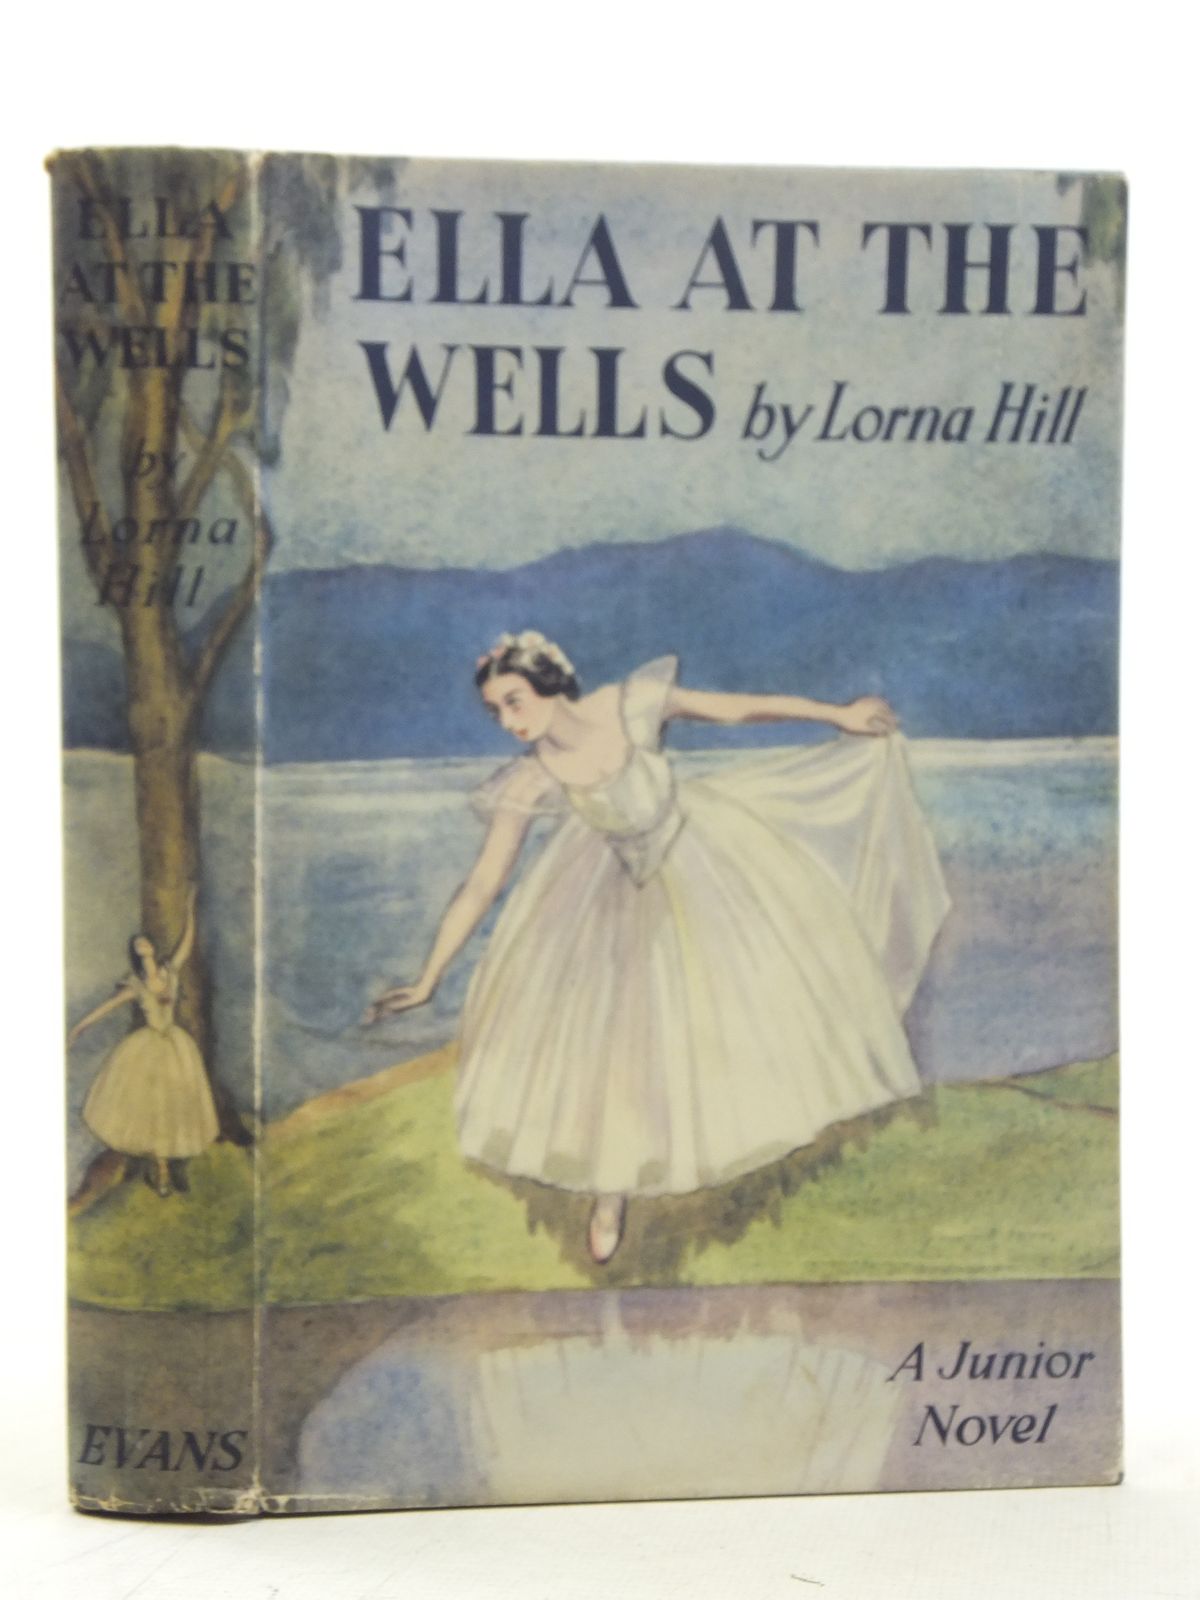 Cover of ELLA AT THE WELLS by Lorna Hill